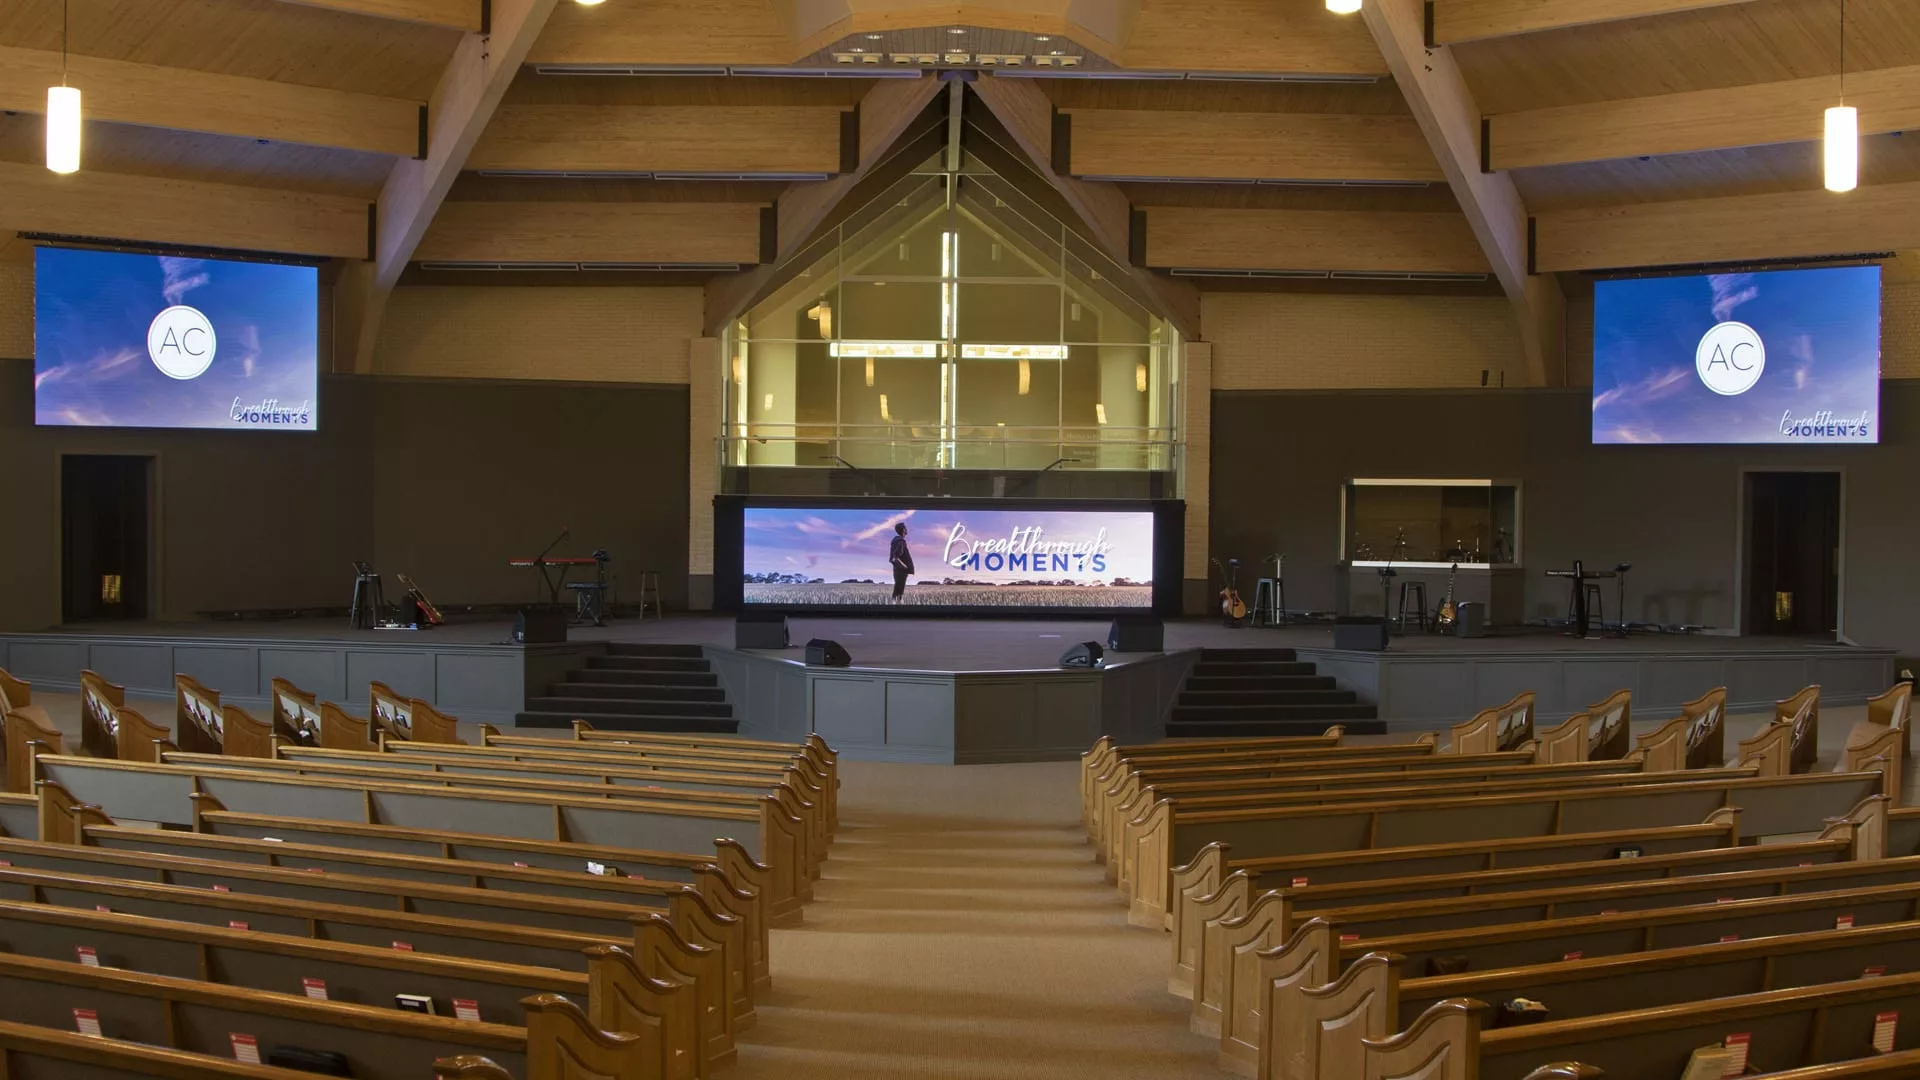 Case Study | House of Worship LED Video Wall